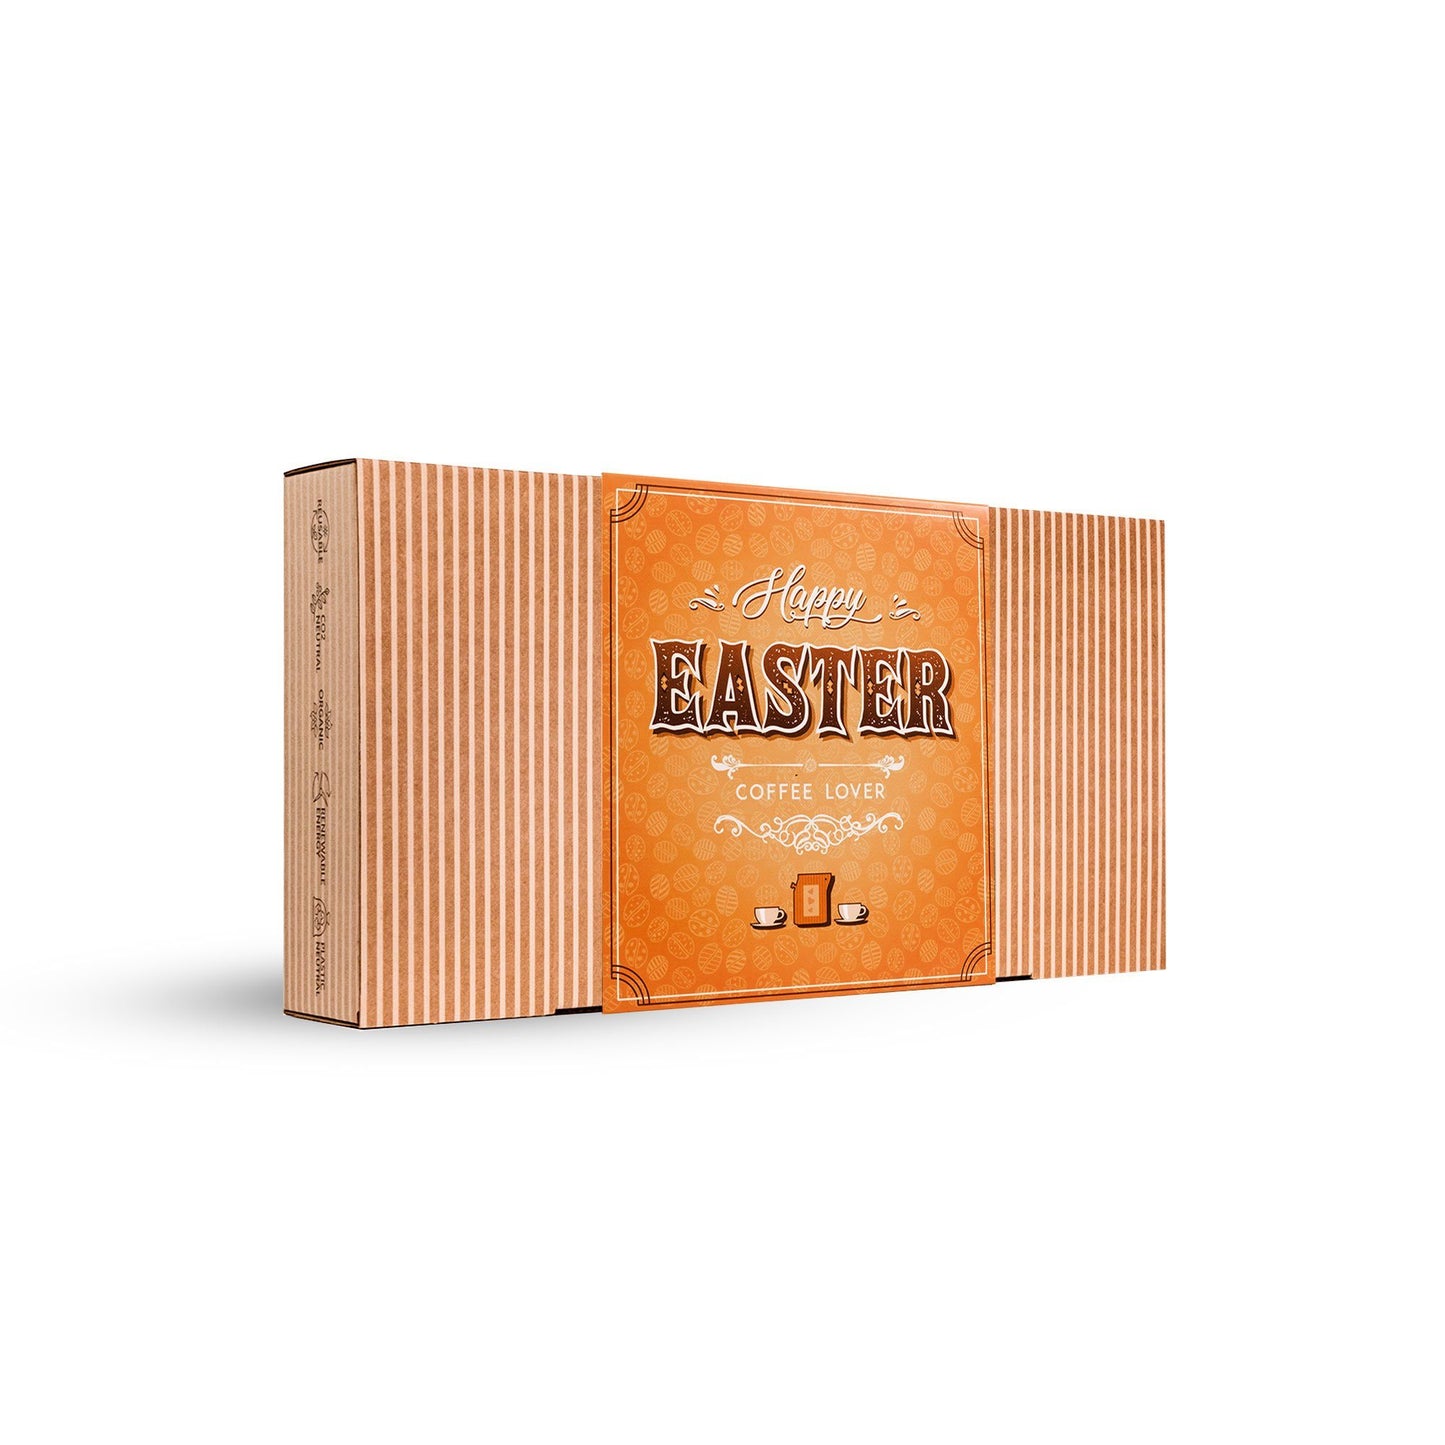 HAPPY EASTER SPECIALTY COFFEE GIFT BOX-3